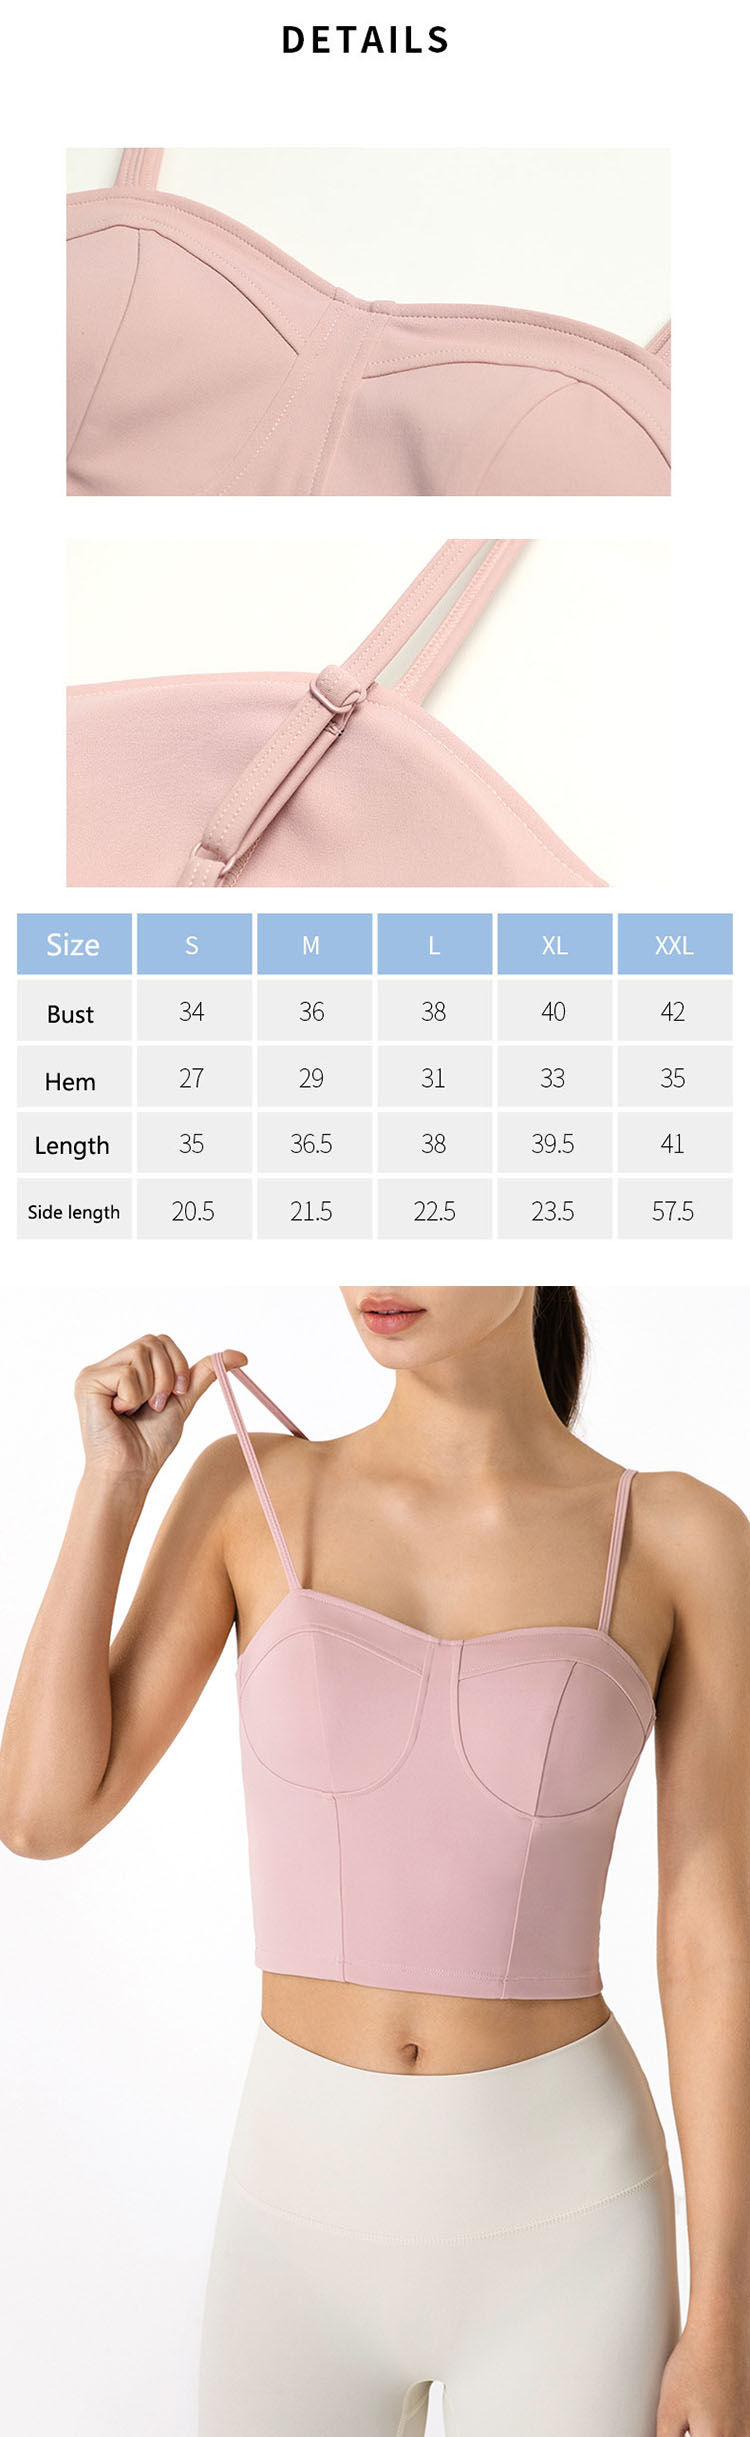 The outer-wearing structure of underwear can create a full breast shape.